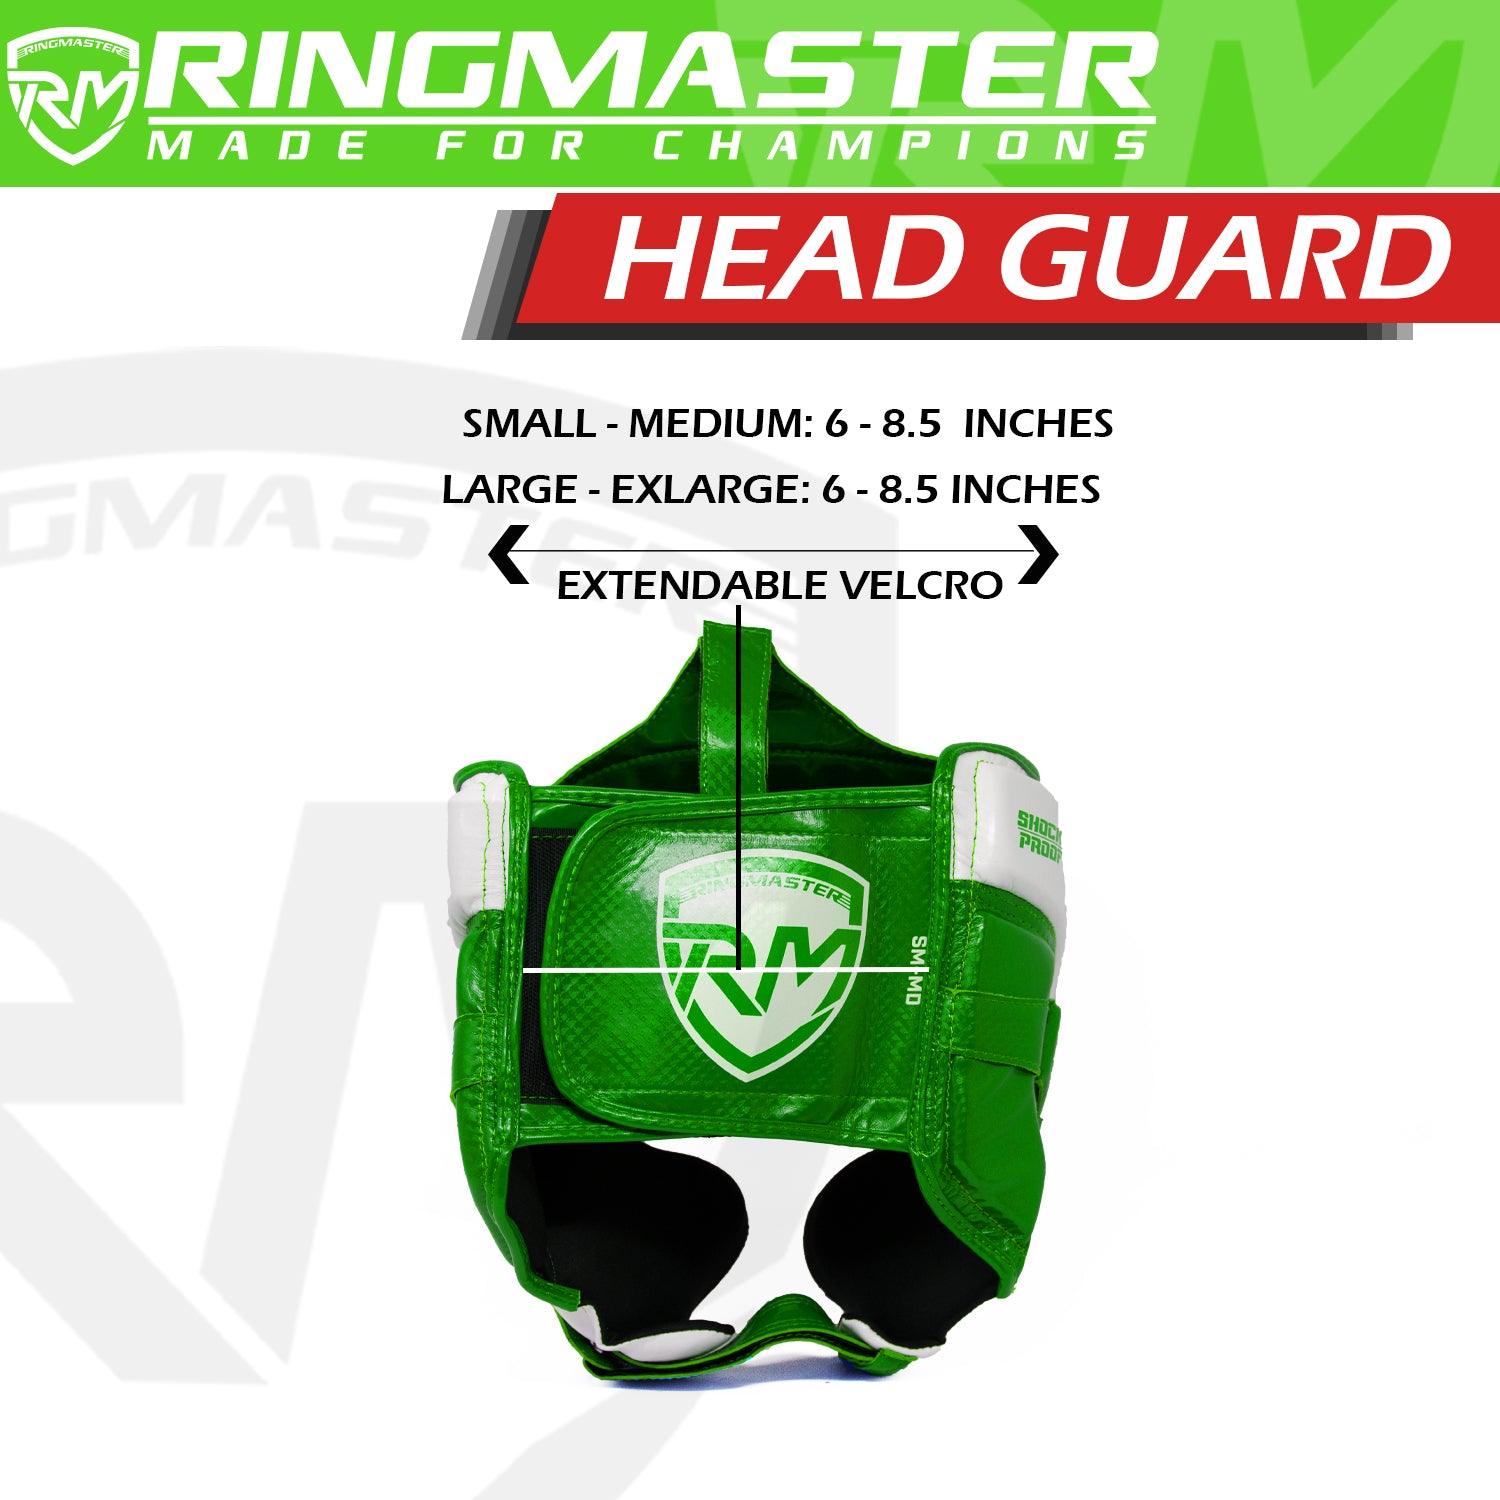 Ringmaster Head guard Boxing, Best boxing head guard, boxing head guard uk, MMA head guard, boxing headgear, MArtial Arts head guard, boxing head guard full face, Boxing head guard for sale, face guard boxing, Green and White Head guard, RingMaster Sports Boxing Head Guard SHK2.0 Series Green and White image 4